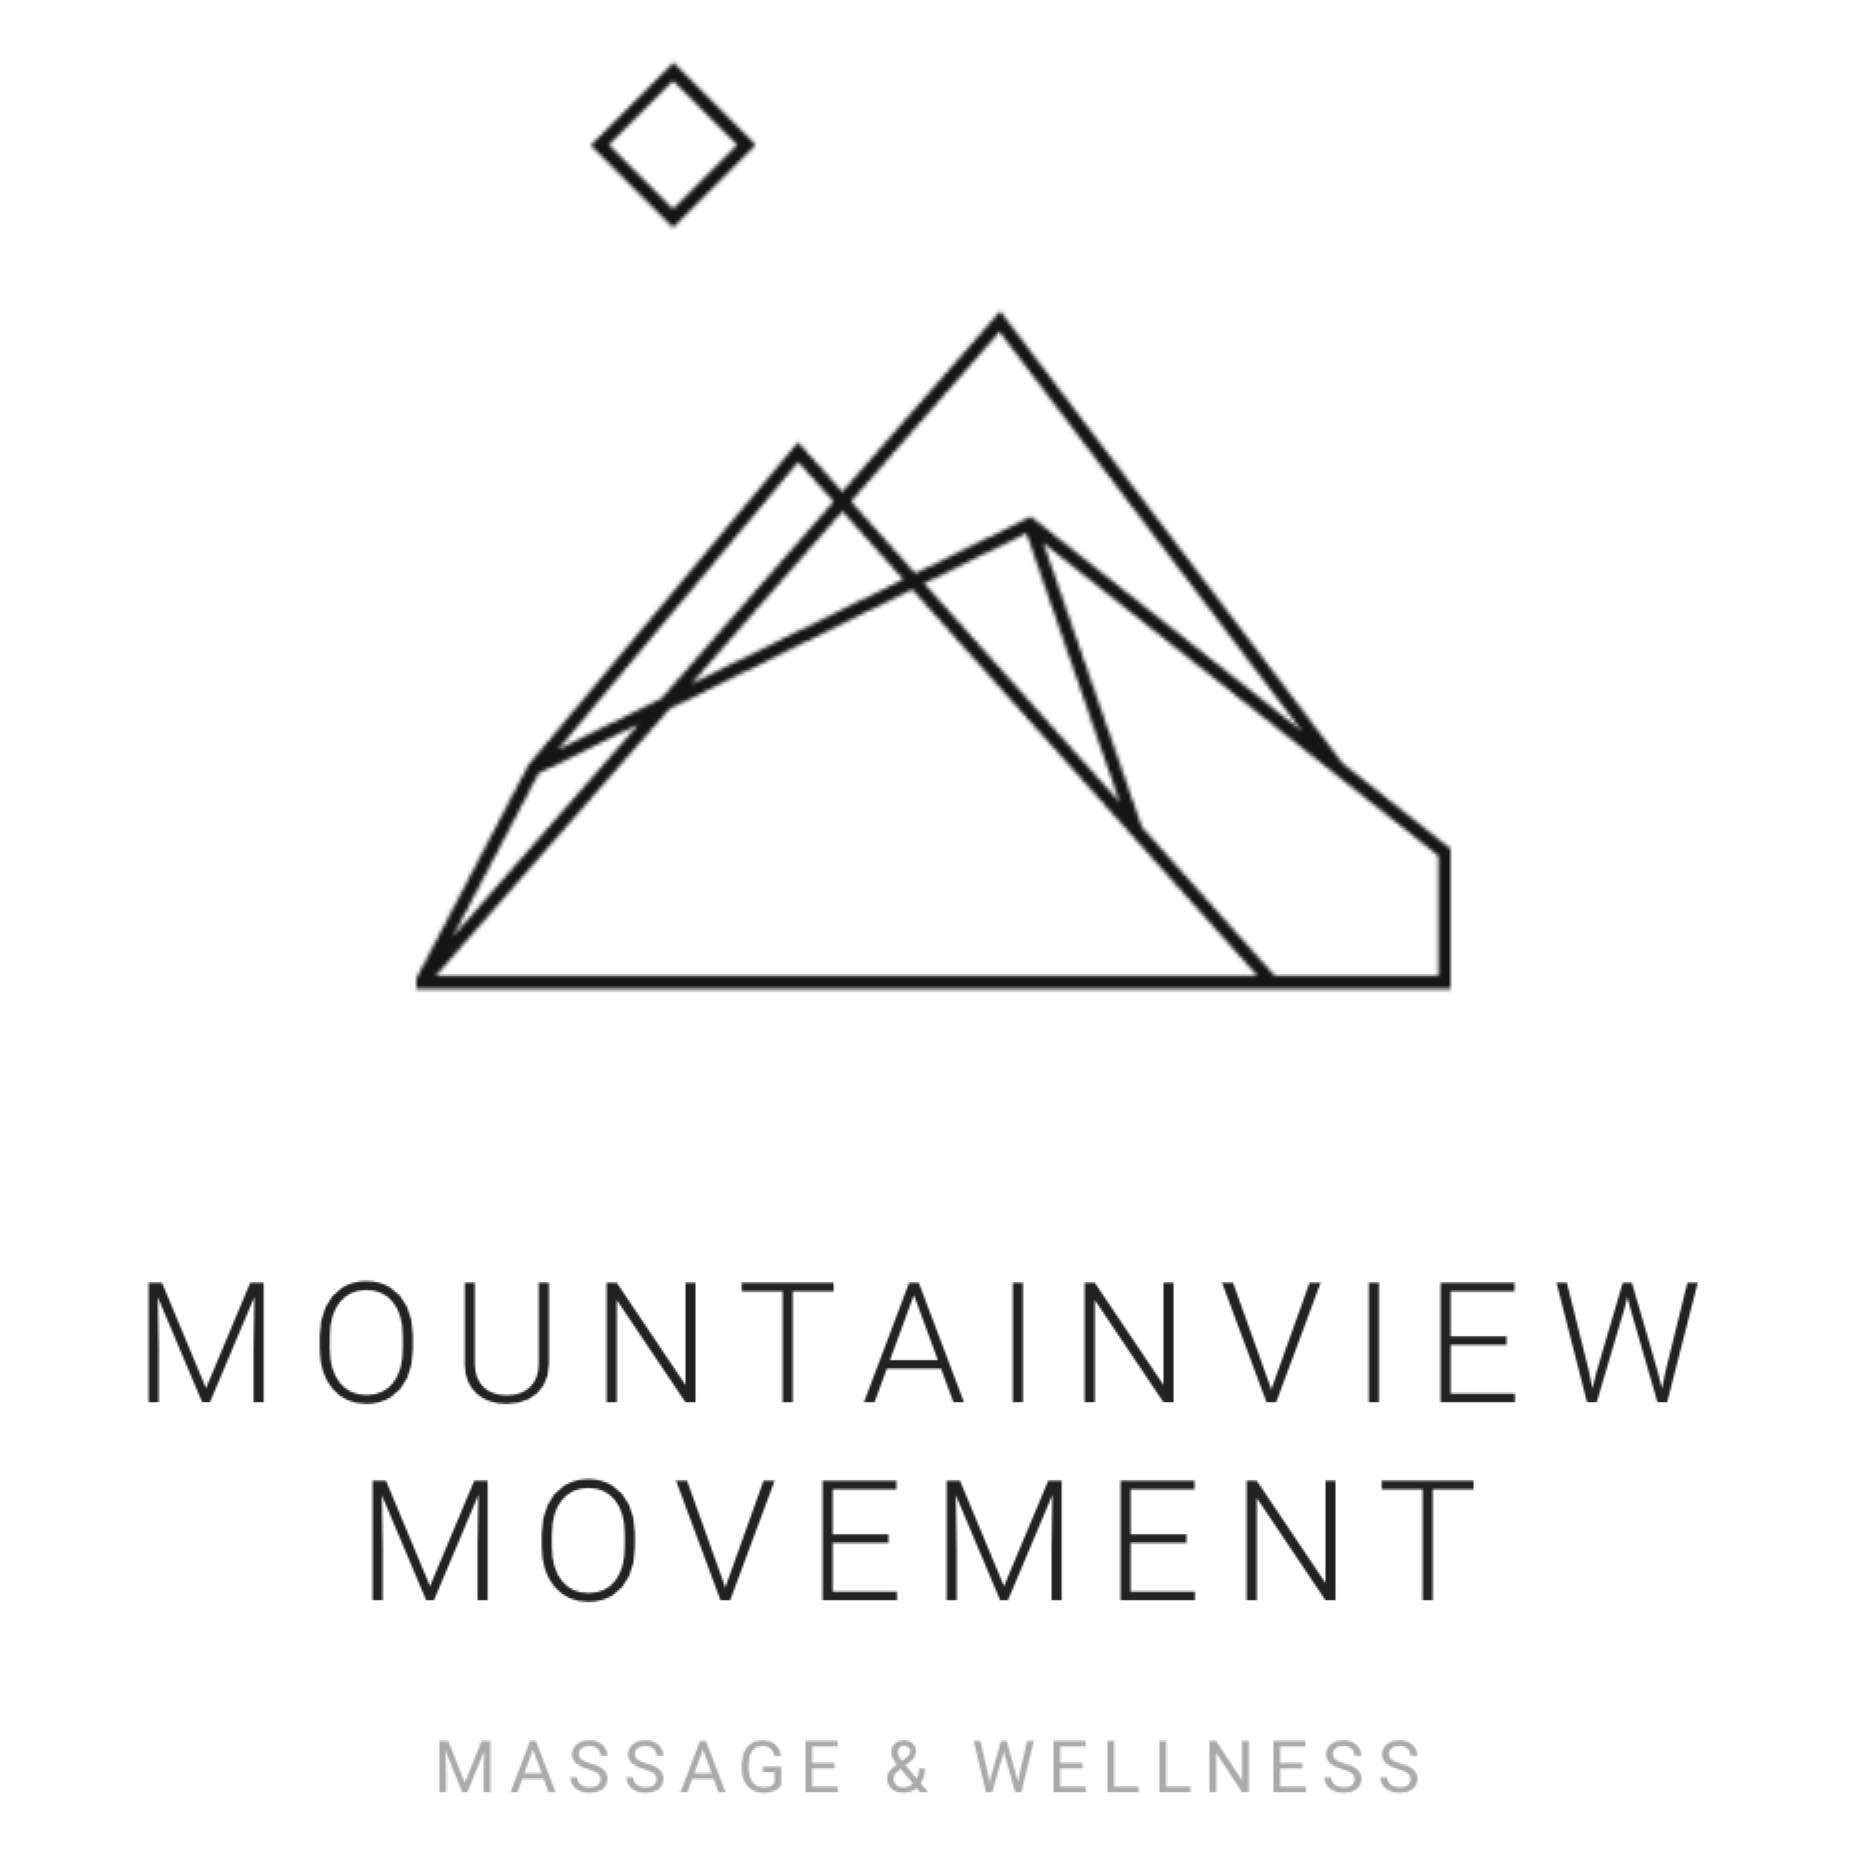 Mountainview Movement Massage and Wellness - South Granville RMT